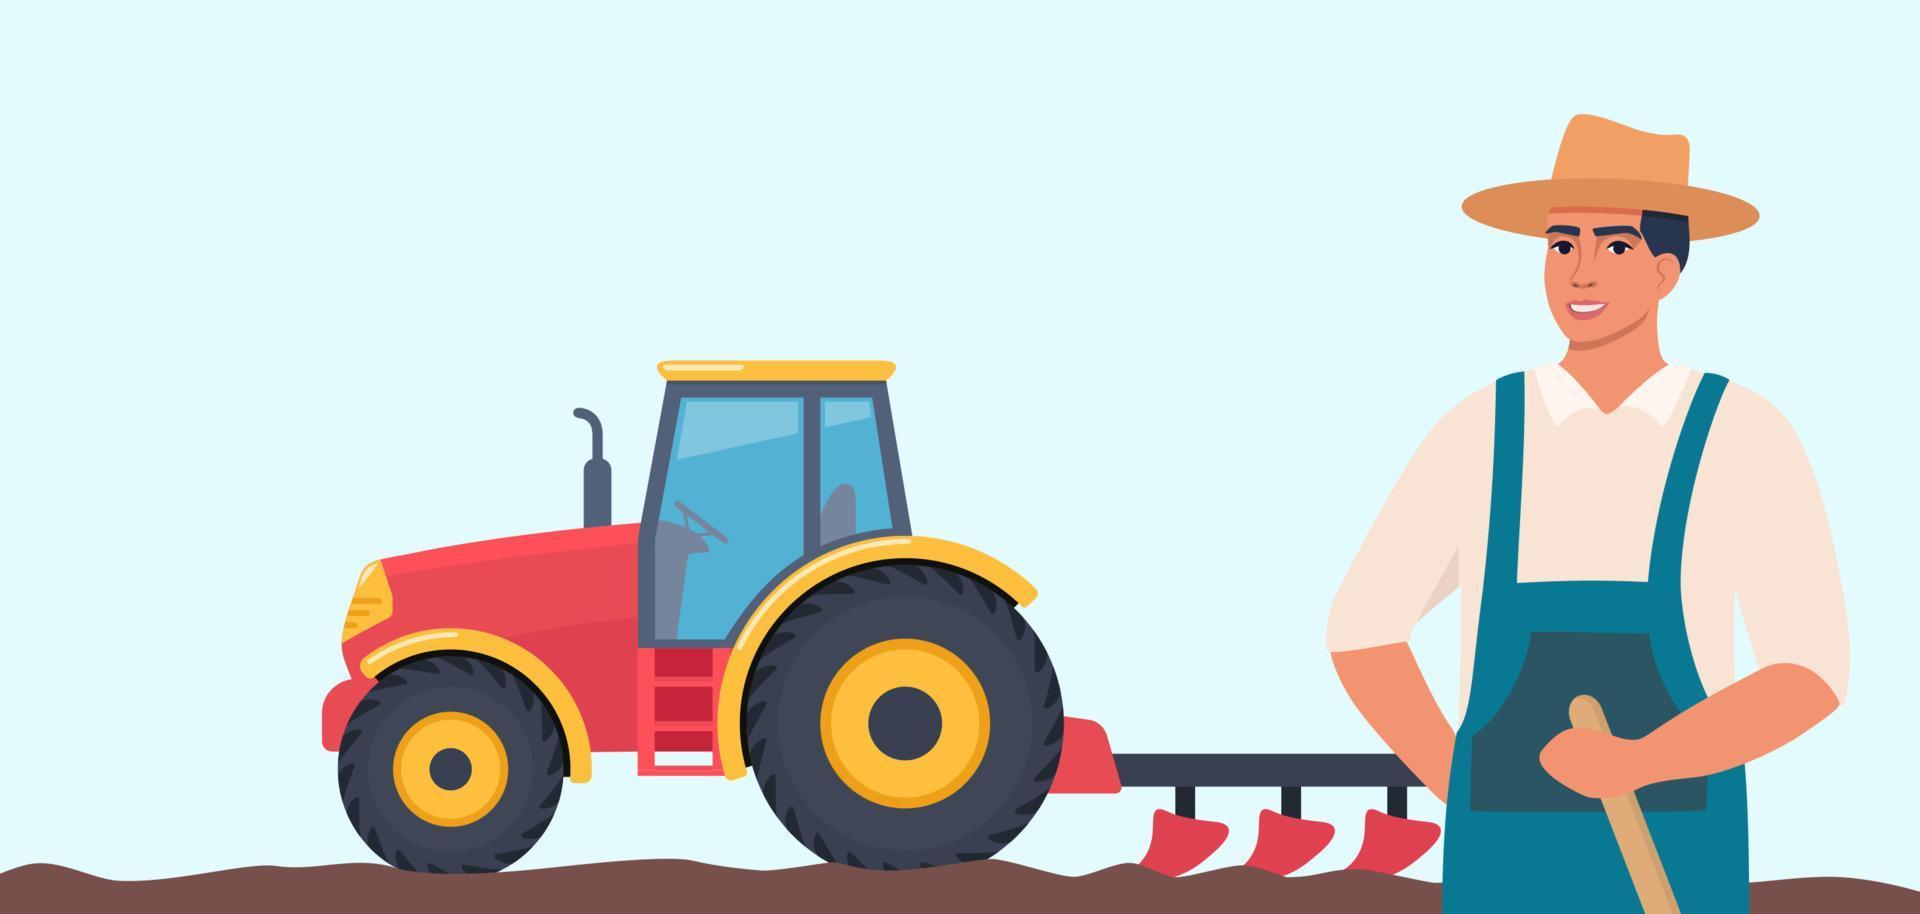 Tractor plowing the field and farmer stands in the foreground. Rural farm landscape. Agriculture concept. Farm Machine. Vector illustration.